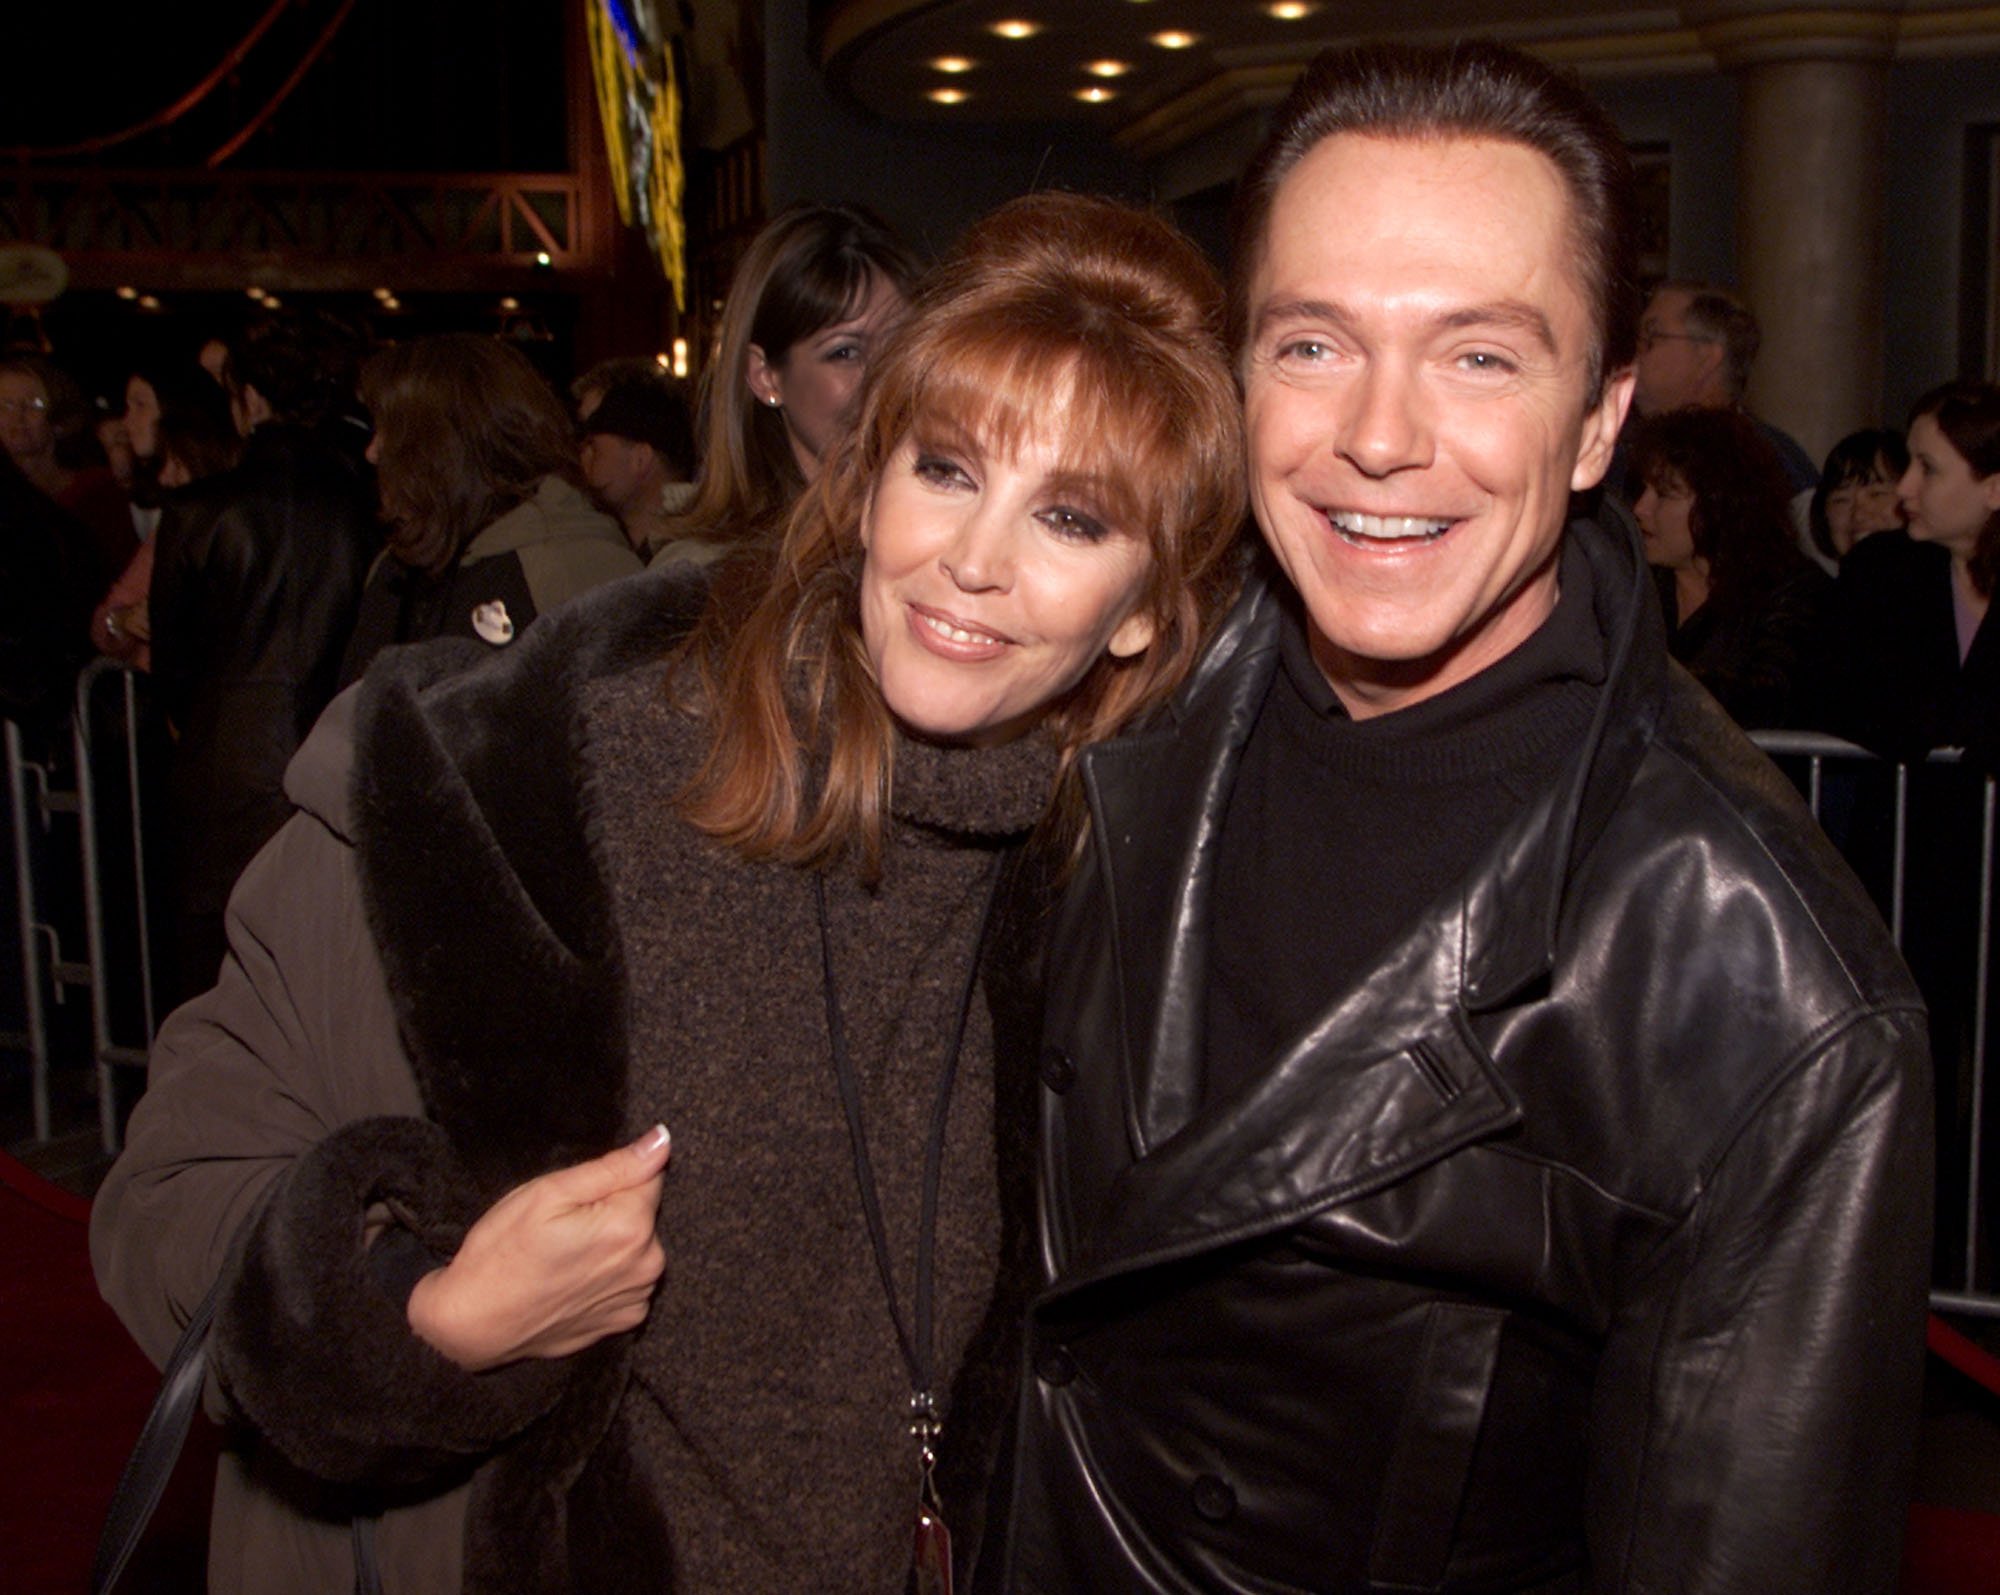 Sue and David Cassidy at Disney's California Adventure for a private pre-opening party on February 7, 2001, in Anaheim, California | Source: Getty Images